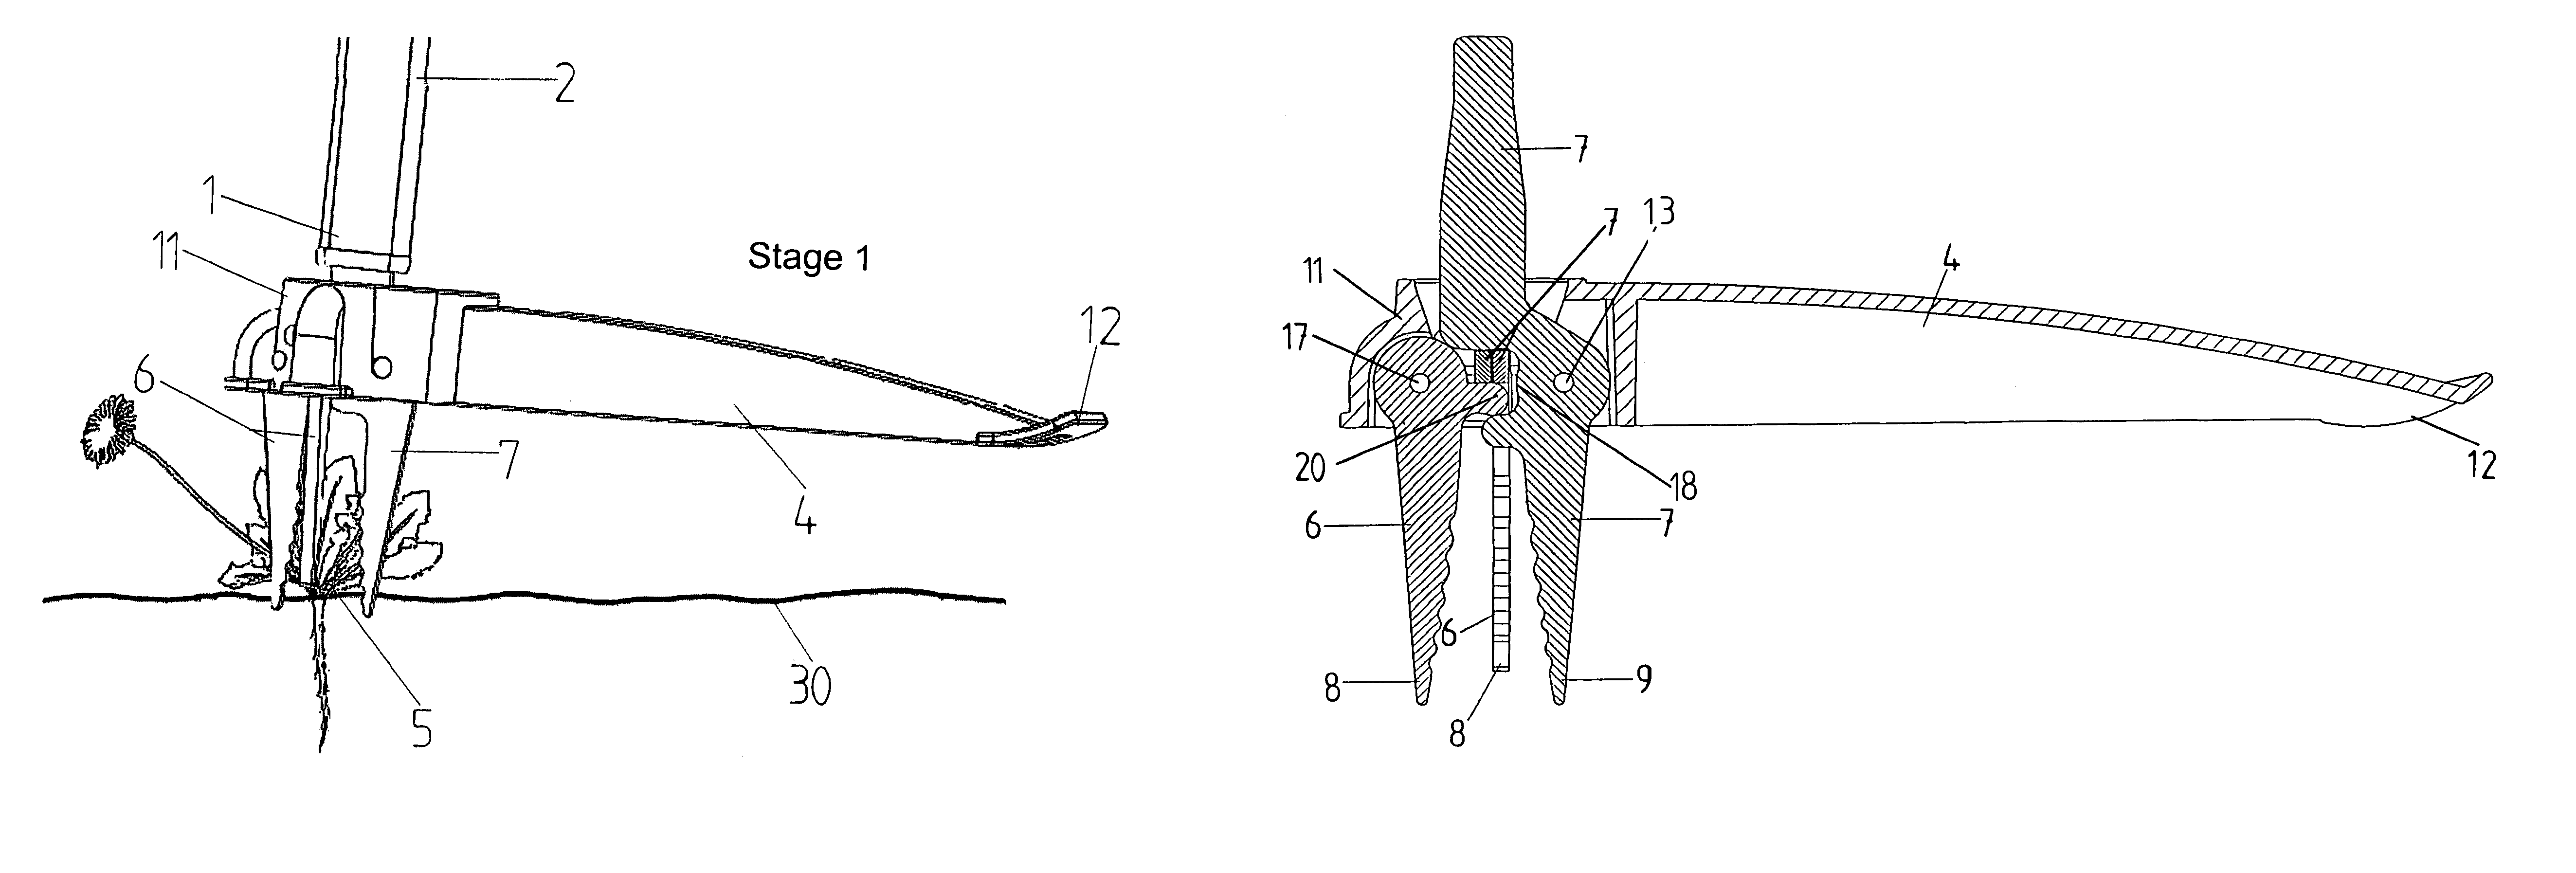 Device for removing plants or the like from ground